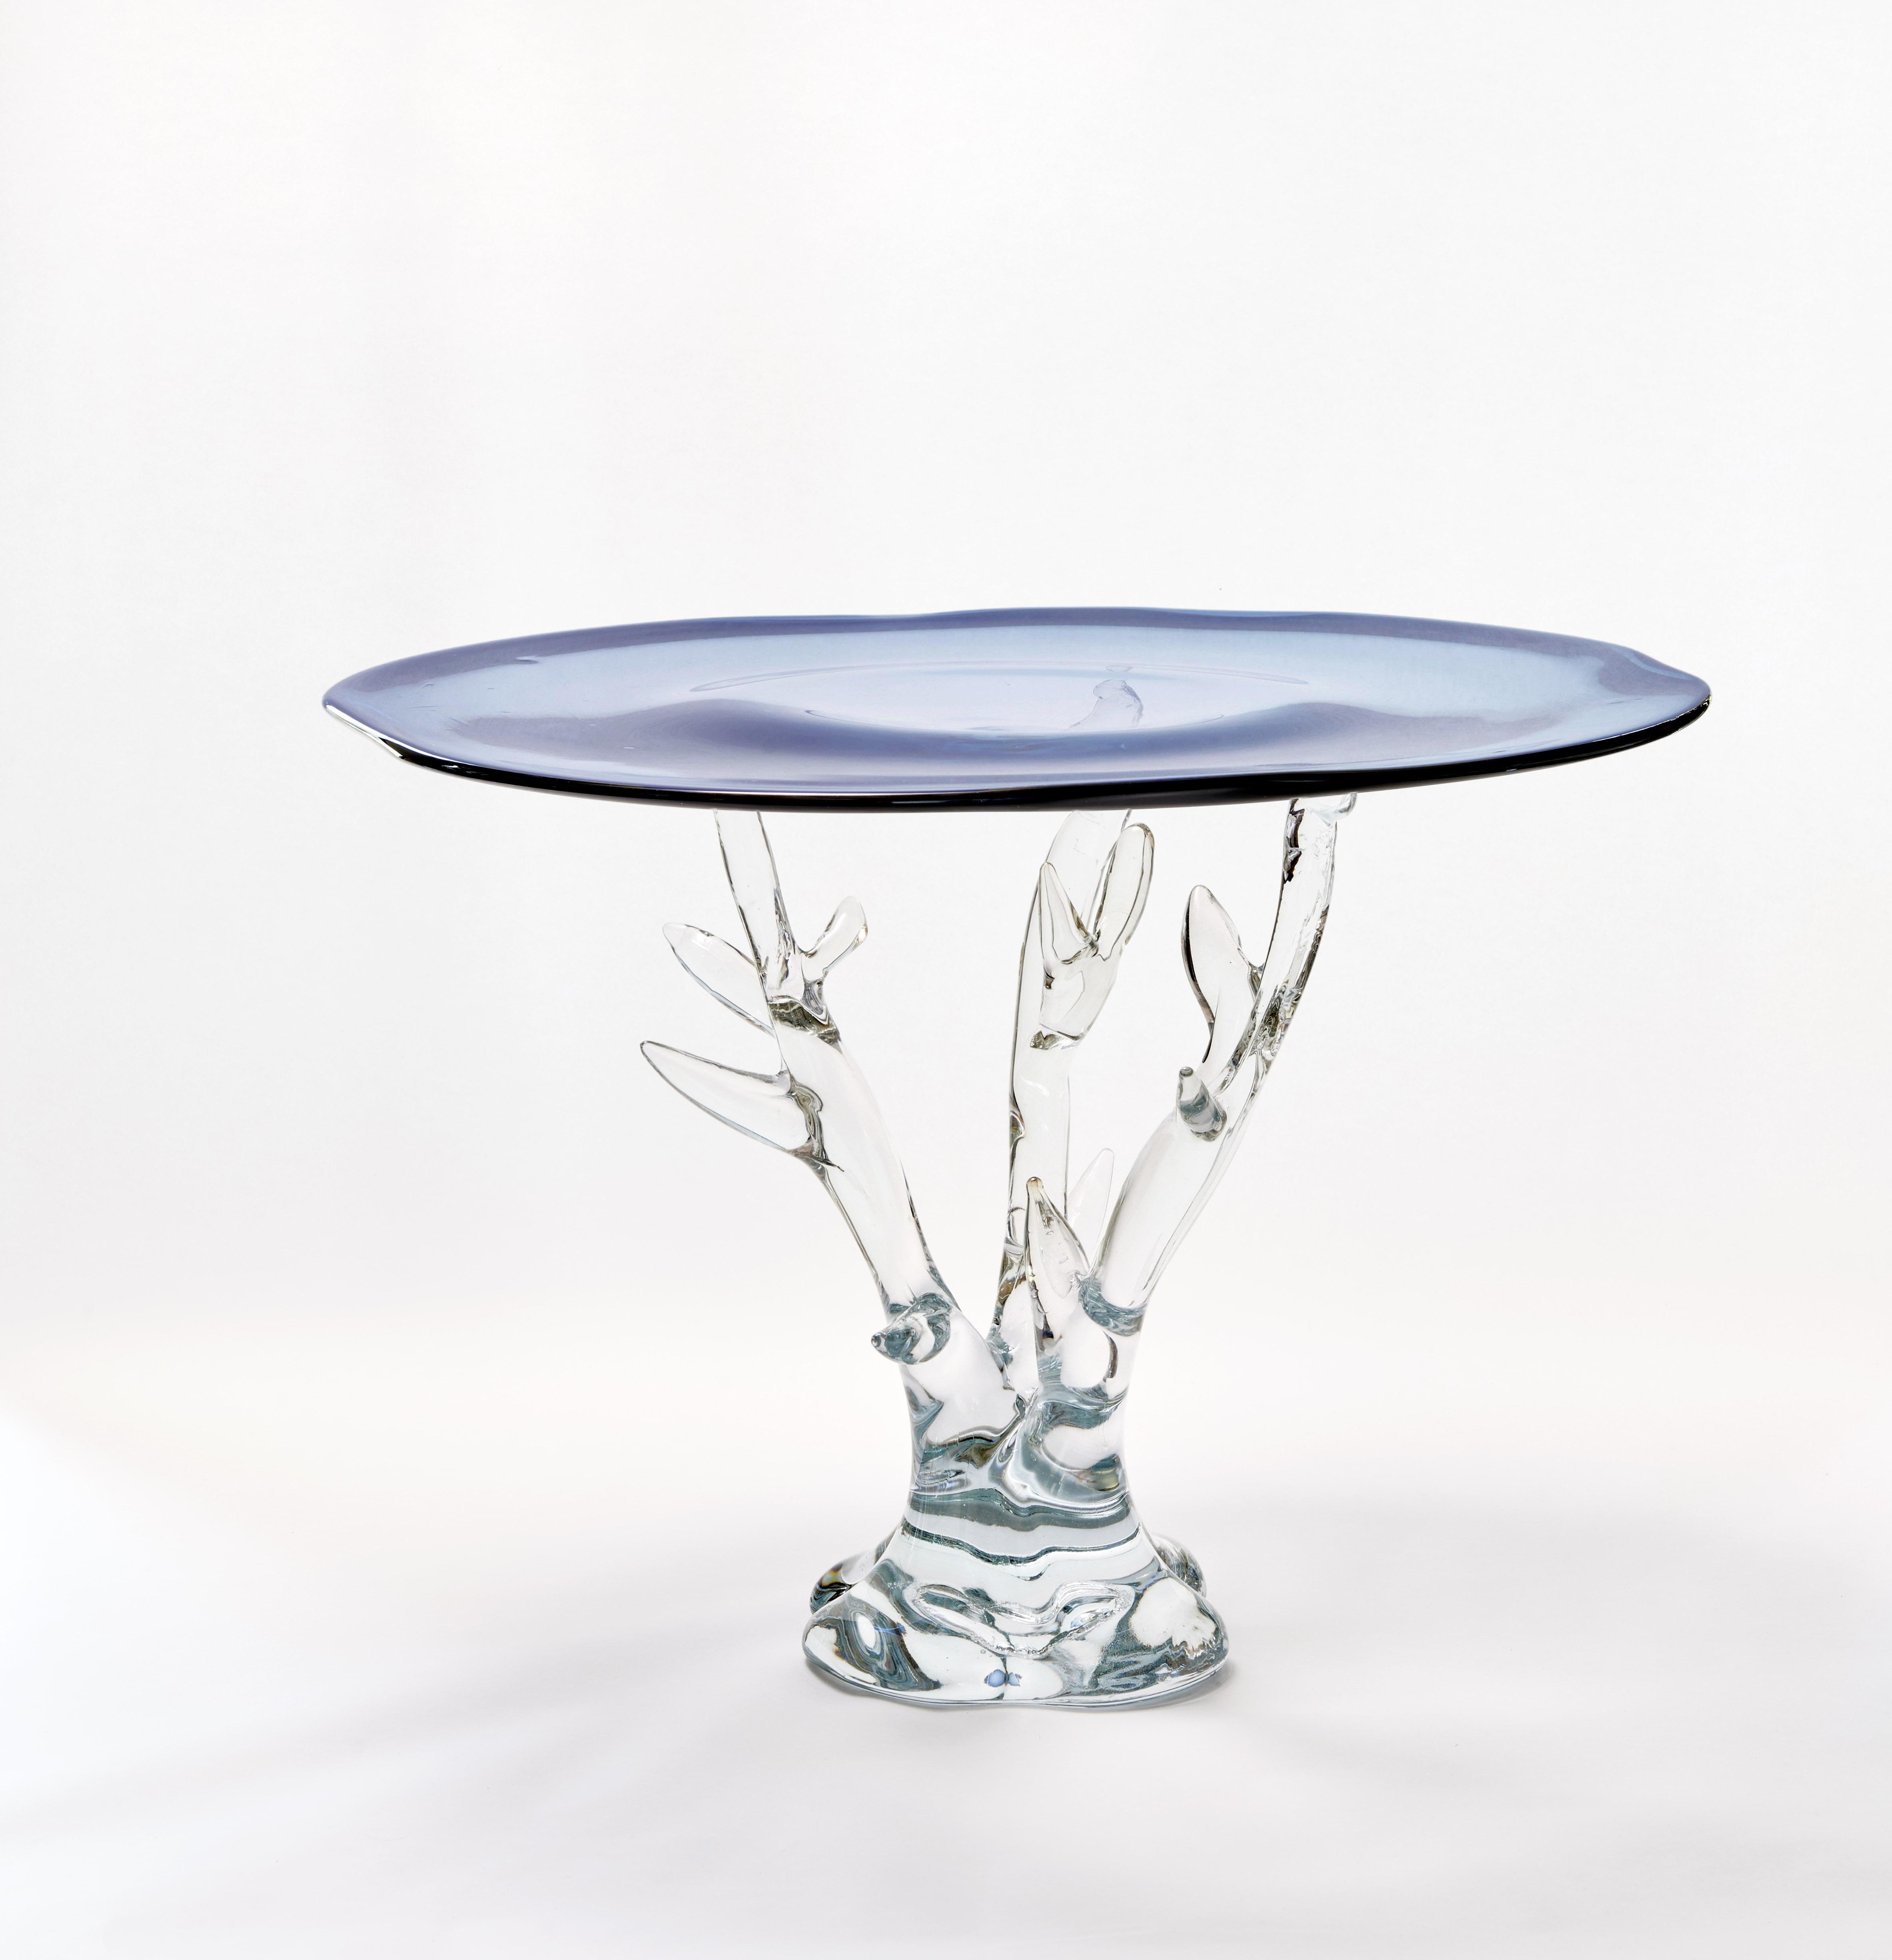 Set of 2 Dryade Coffee Tables by Emilie Lemardeley
Dimensions: 
Table I: Ø 58 x H 42 cm.
Table II: Ø 55 x H 41 cm.
Materials: Hand-blown glass.

Designed as jewellery for the interior, the Lemardeley’s creations reflect French craftsmanship infused